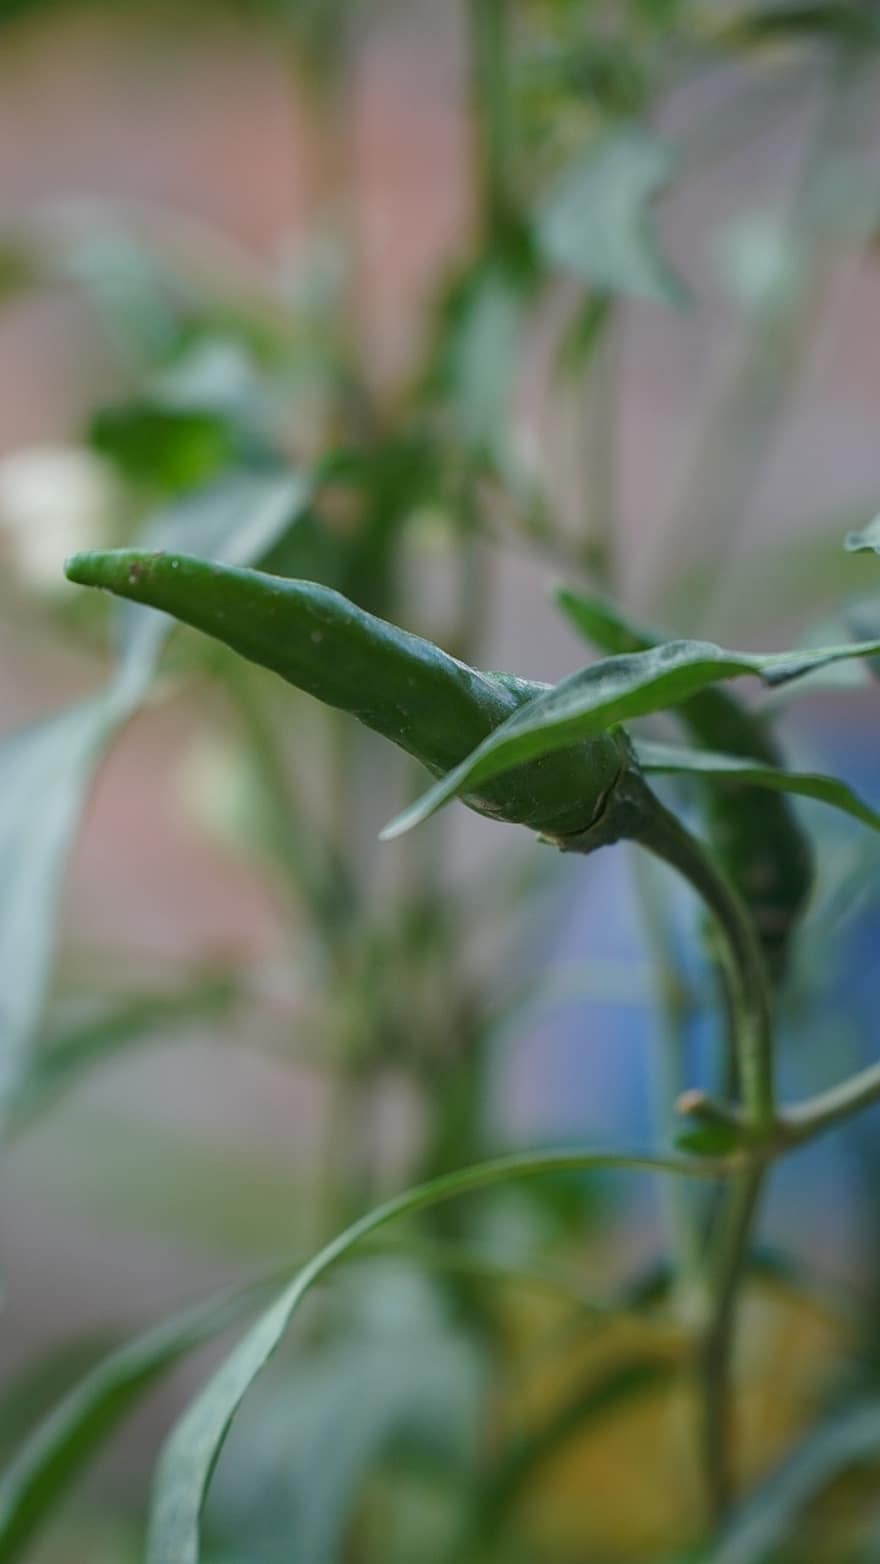 Green Chili Pepper, Fruit, Plant, Chili Pepper, Hot Pepper, Chili, Young Fruit, Leaves, Nature